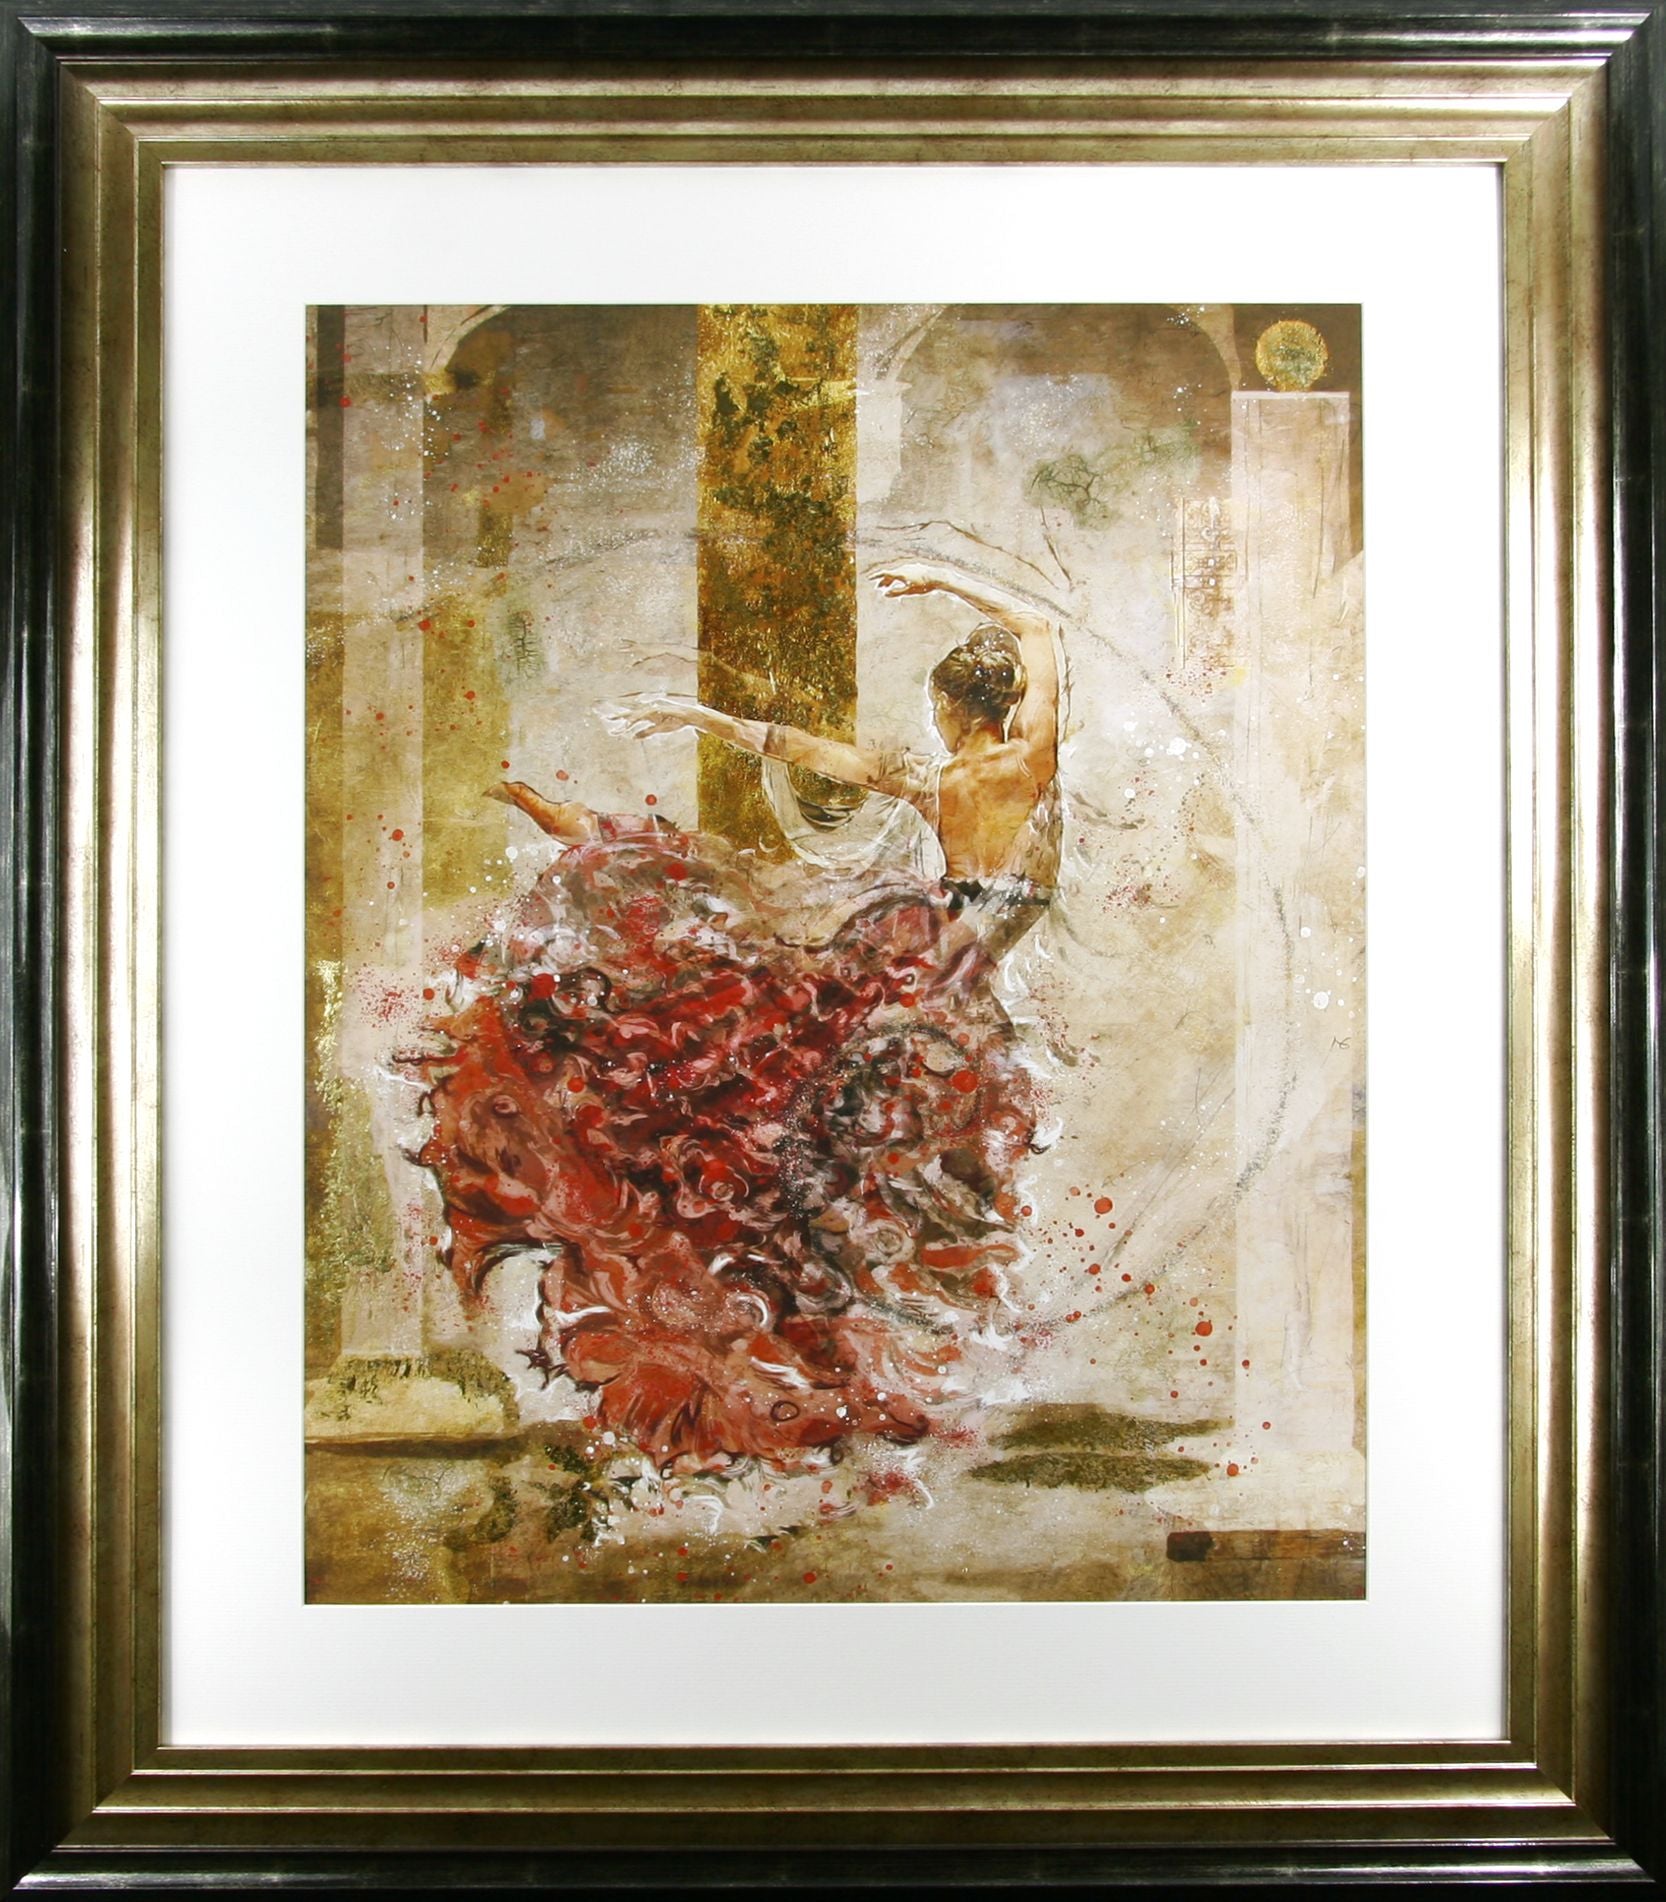 Temple Dancer framed print by Marta Wiley